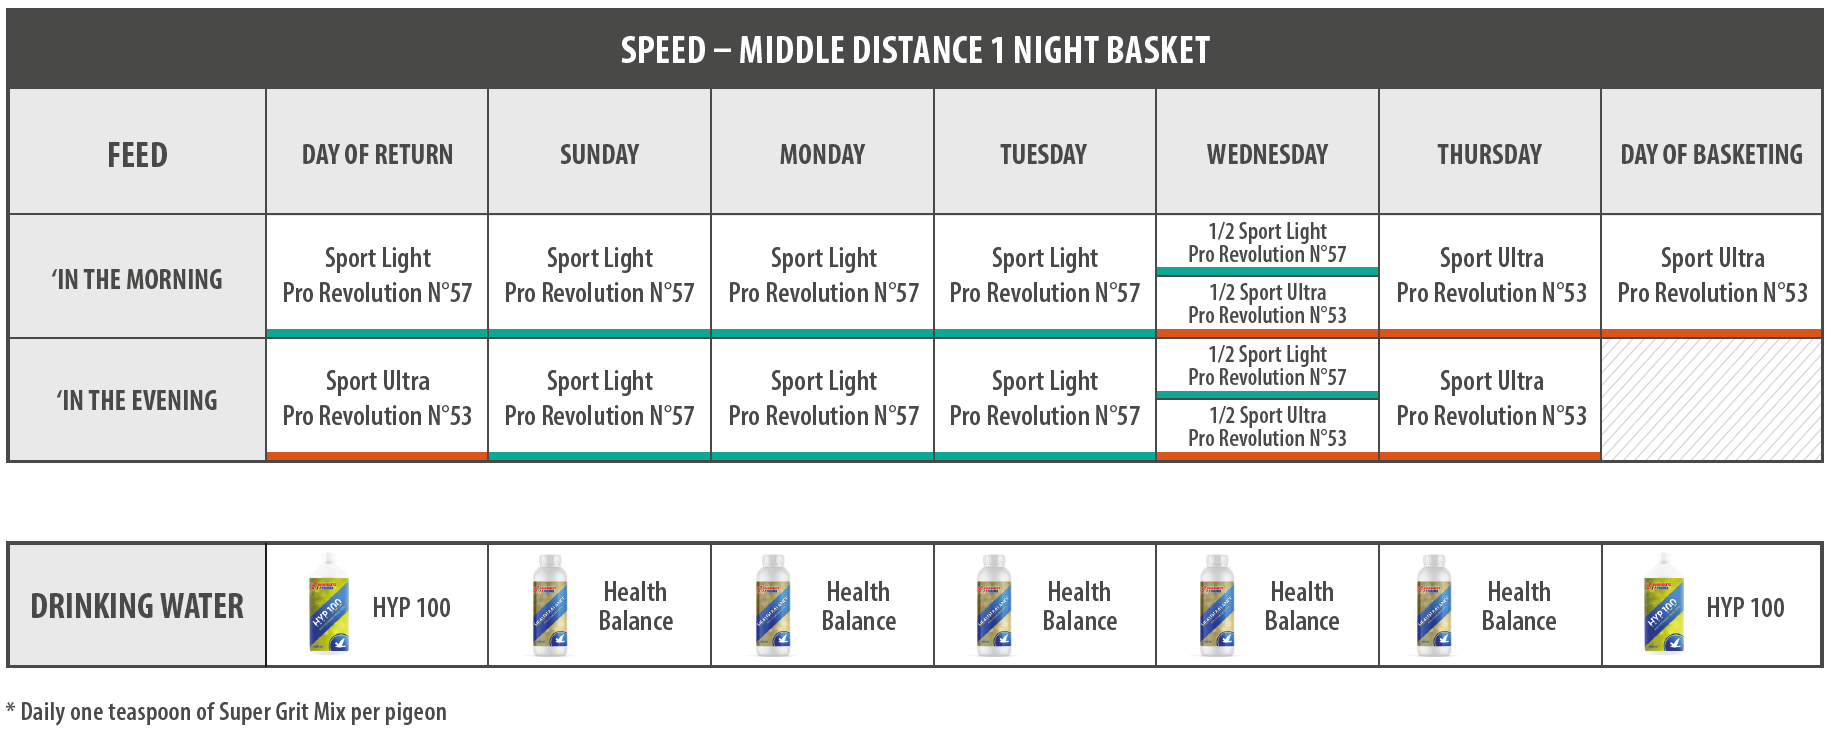 Speed - Middle Distance 1 night basket